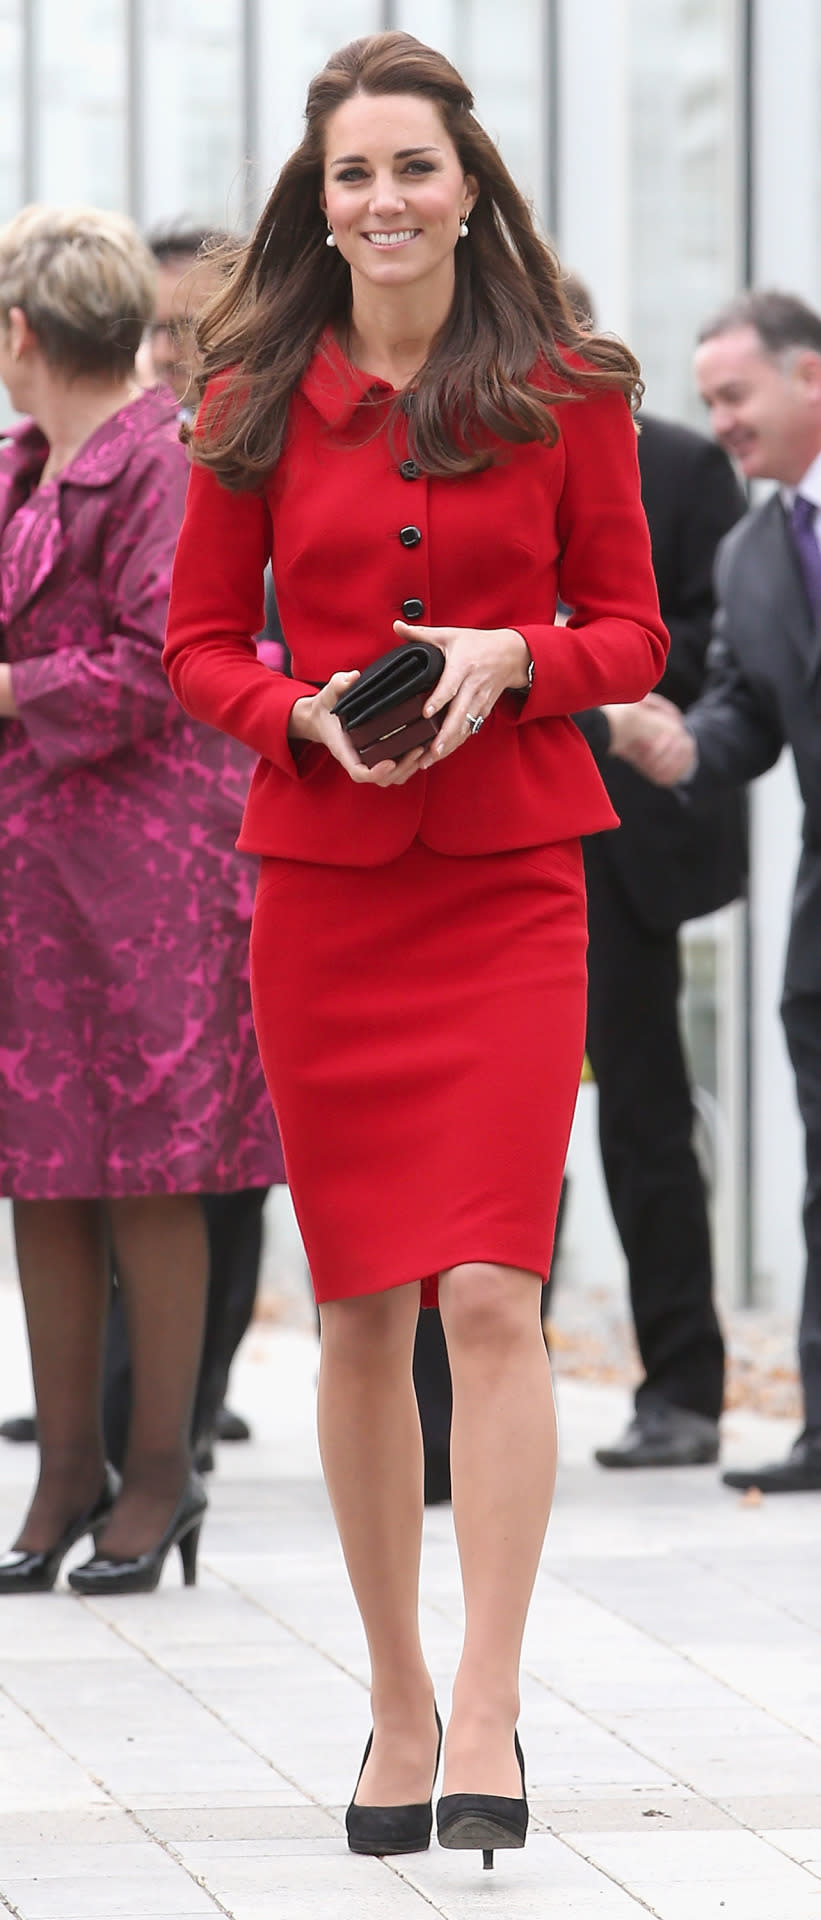 <p>Kate spent a day in Christchurch, New Zealand in a fitted red suit from Luisa Spagnoli. She carried a black Mulberry clutch and finished with suede pumps by Episode. </p><p><i>[Photo: PA]</i></p>